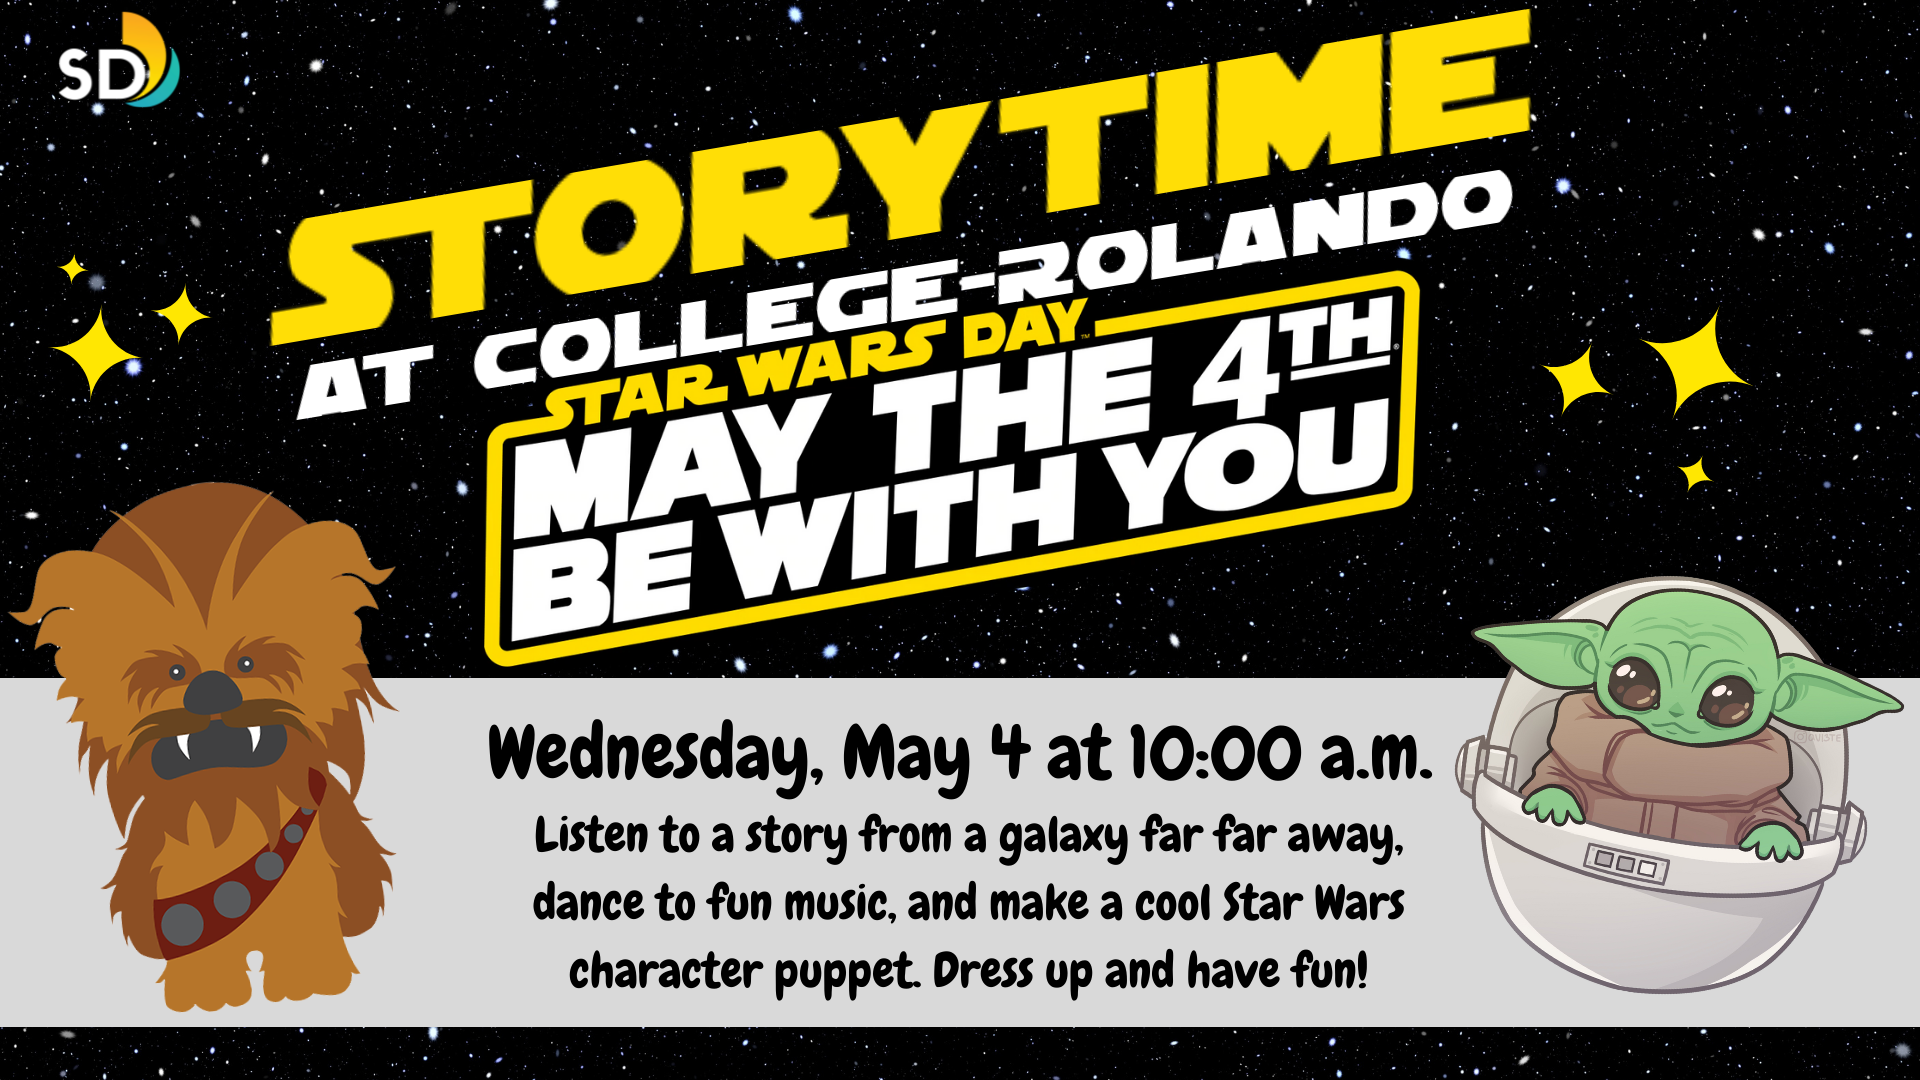 Listen to a story from a galaxy far far away, dance to fun music, and make a cool Star Wars character puppet. Dress up and have fun!